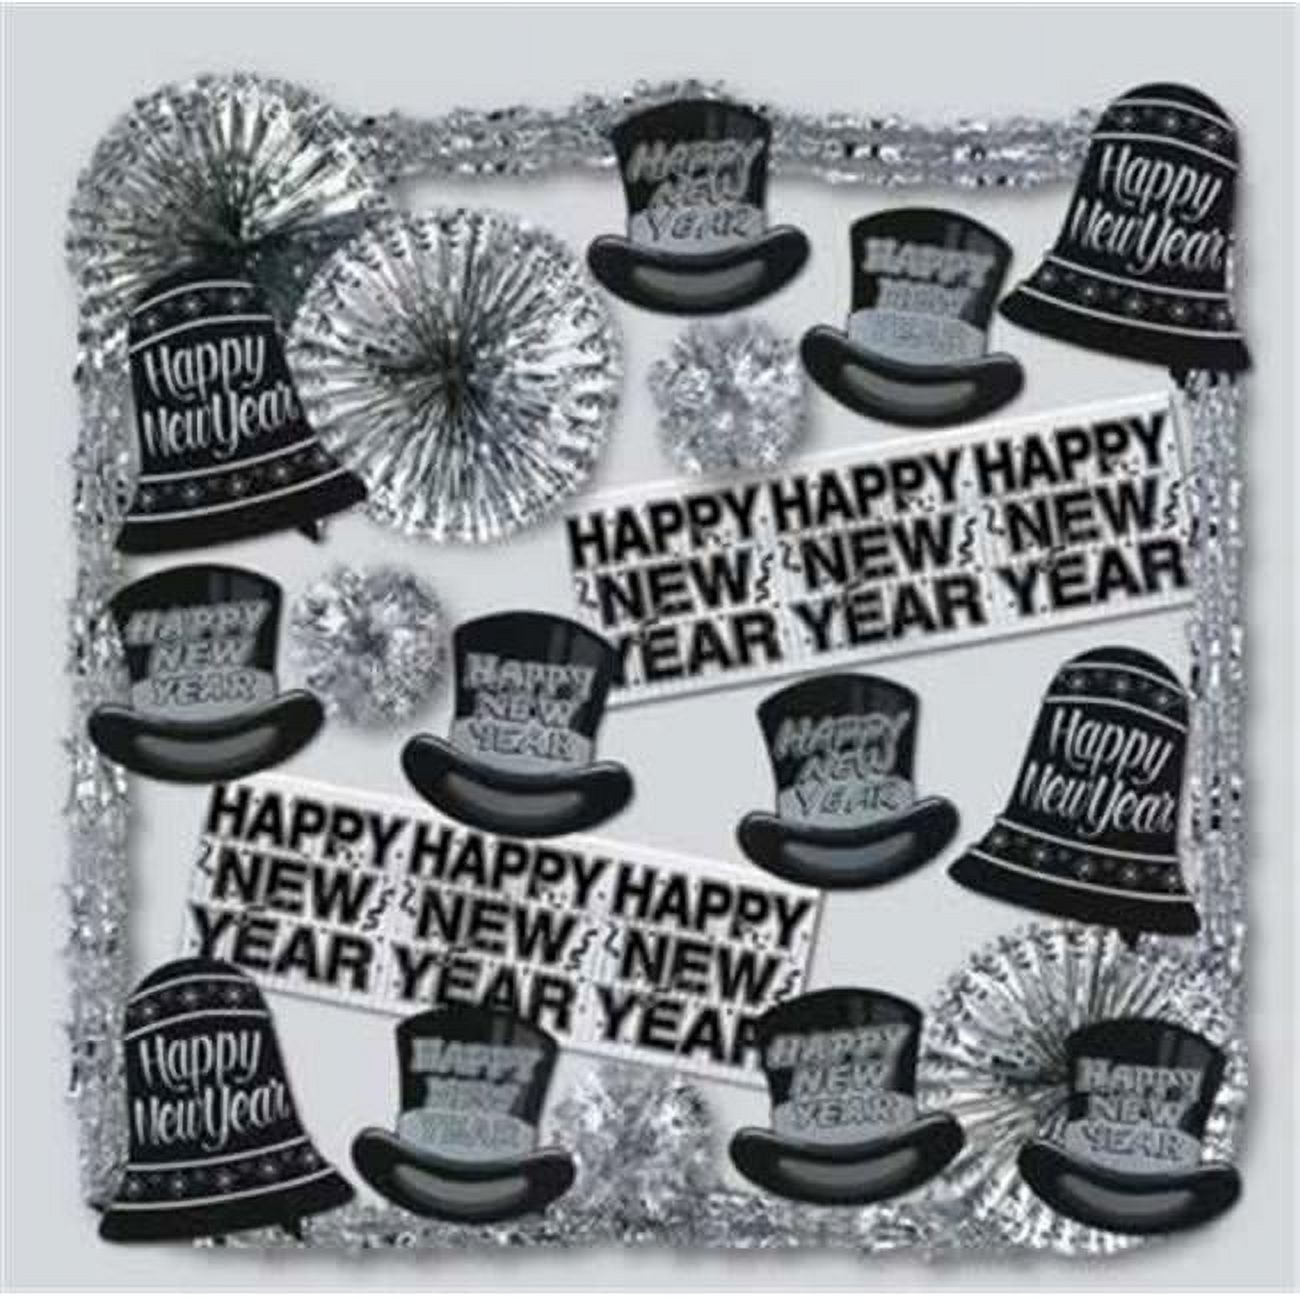 Beistle - 88950-S - Shimmering Silver NY Dec Kit - 24 Pieces - image 1 of 1